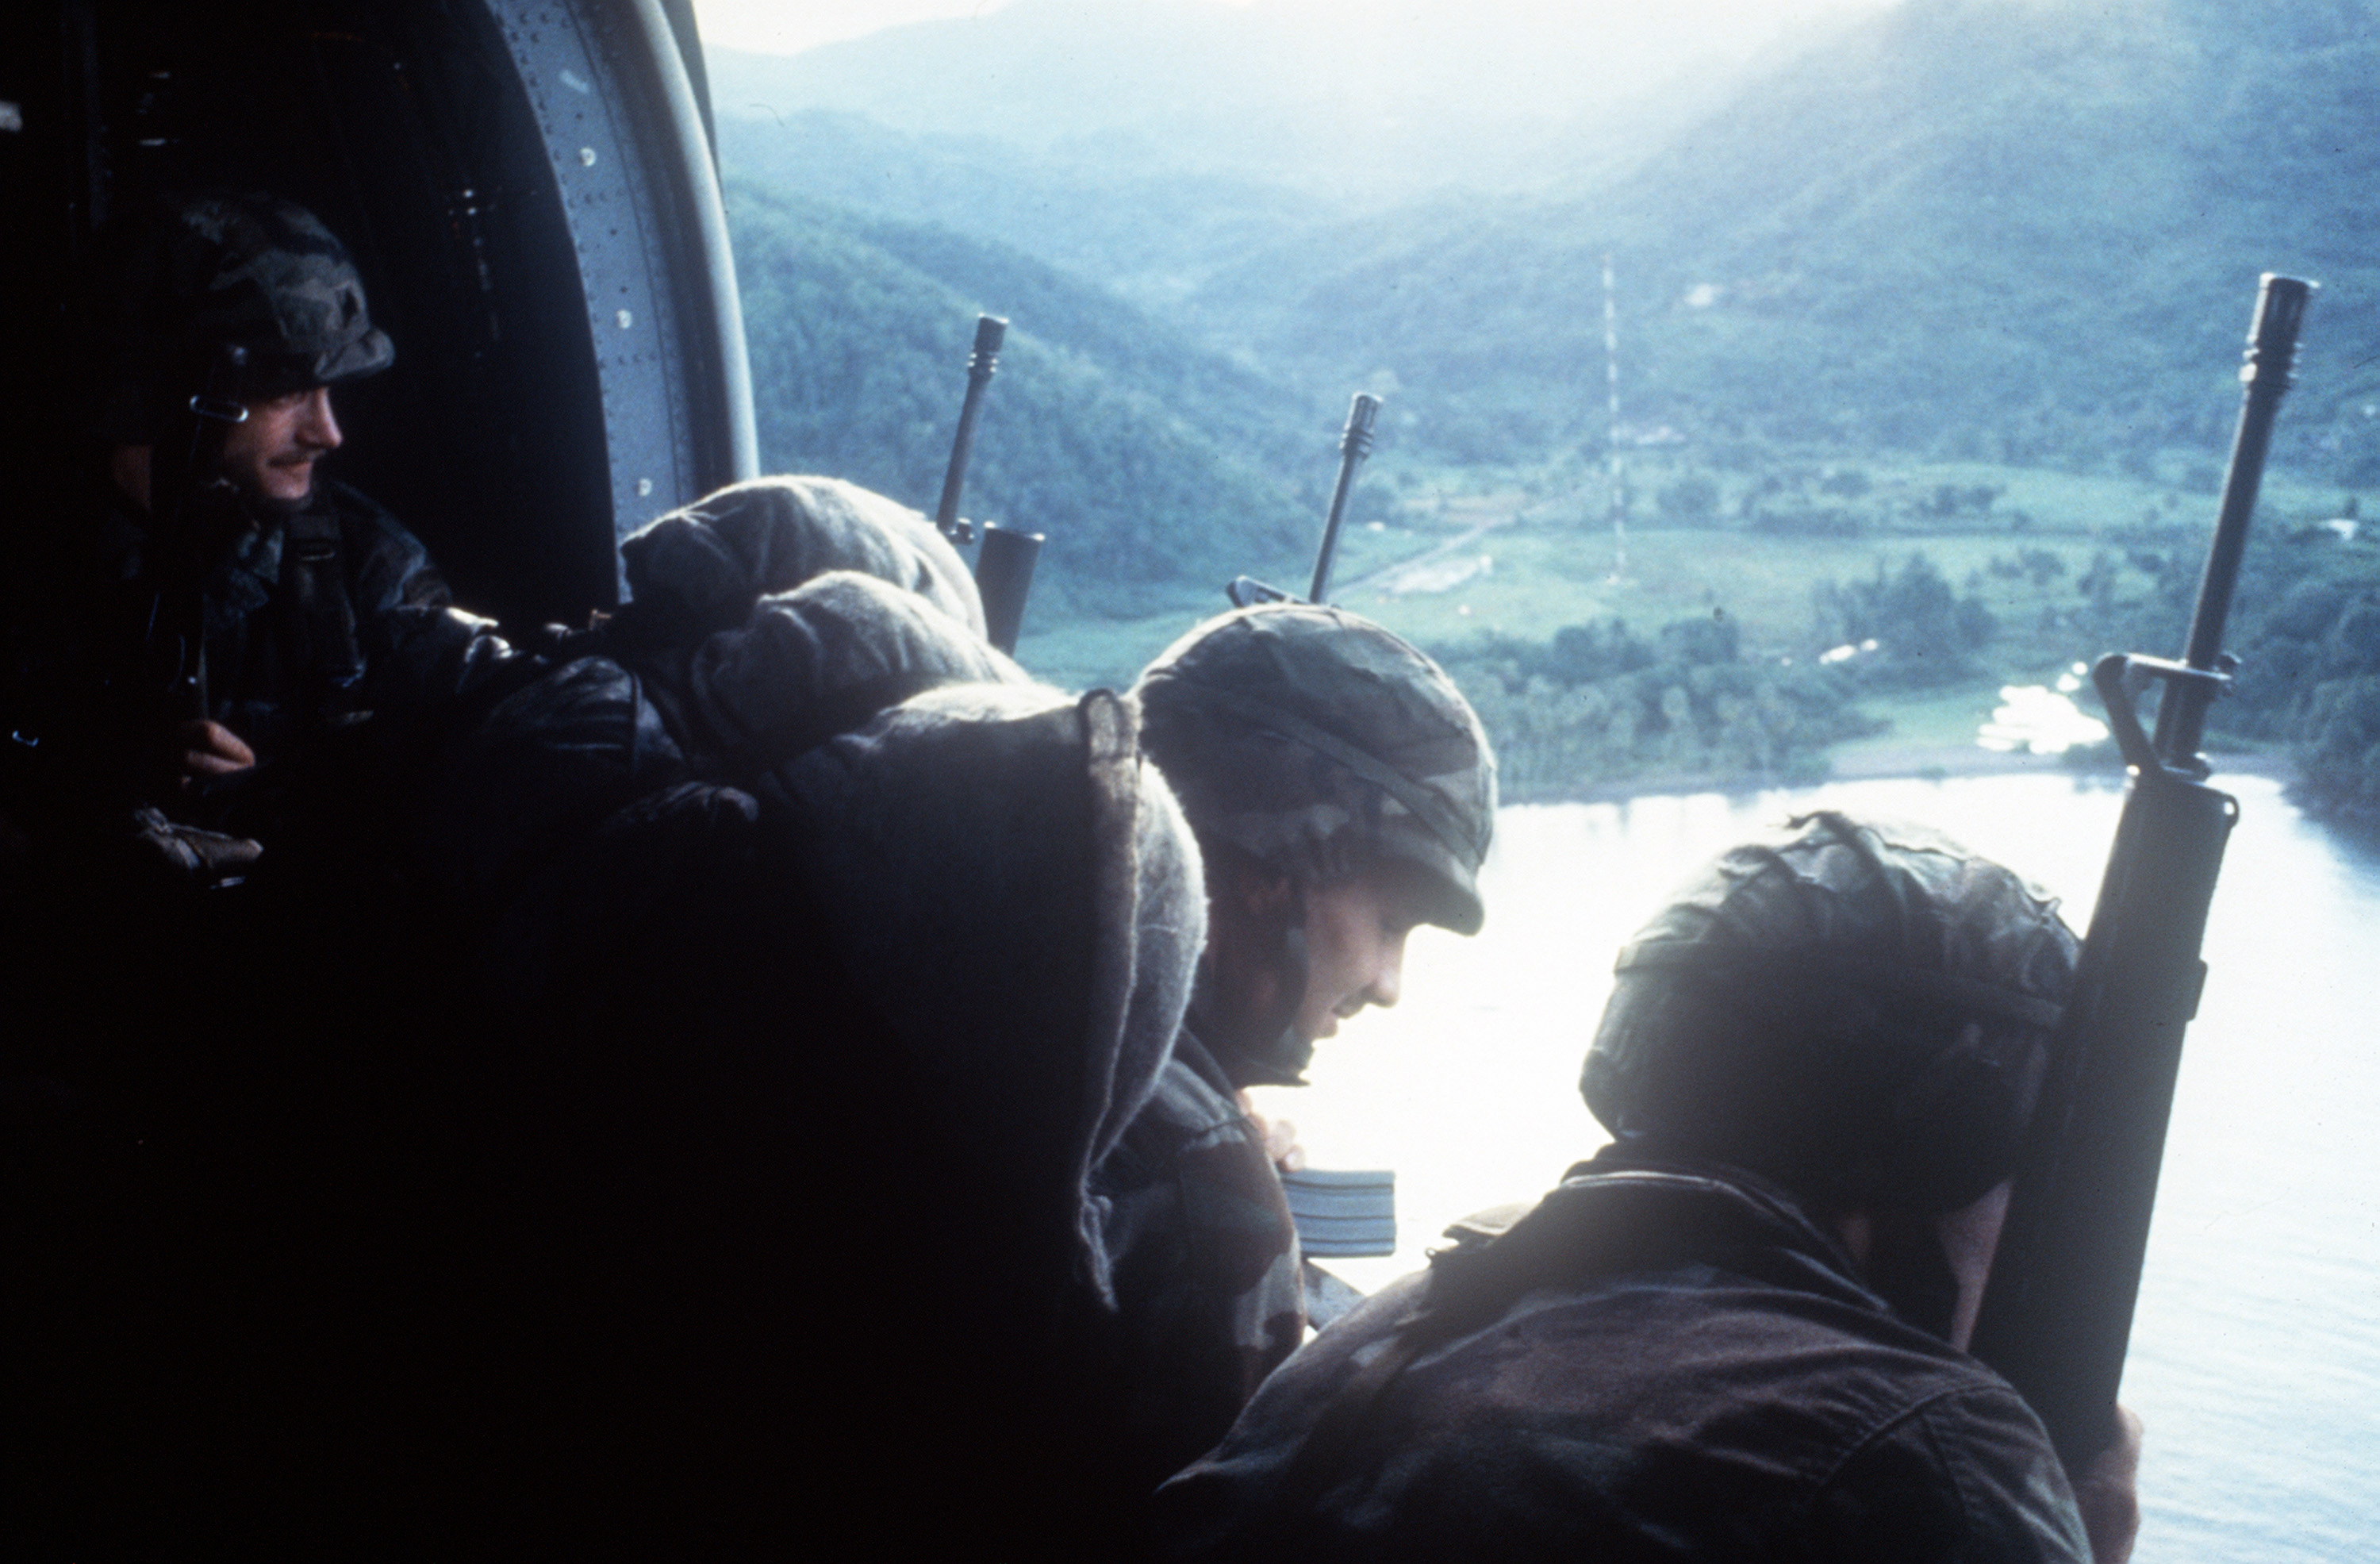 members-of-the-82nd-airborne-division-are-airlifted-into-a-landing-zone-by-2b5733.jpg